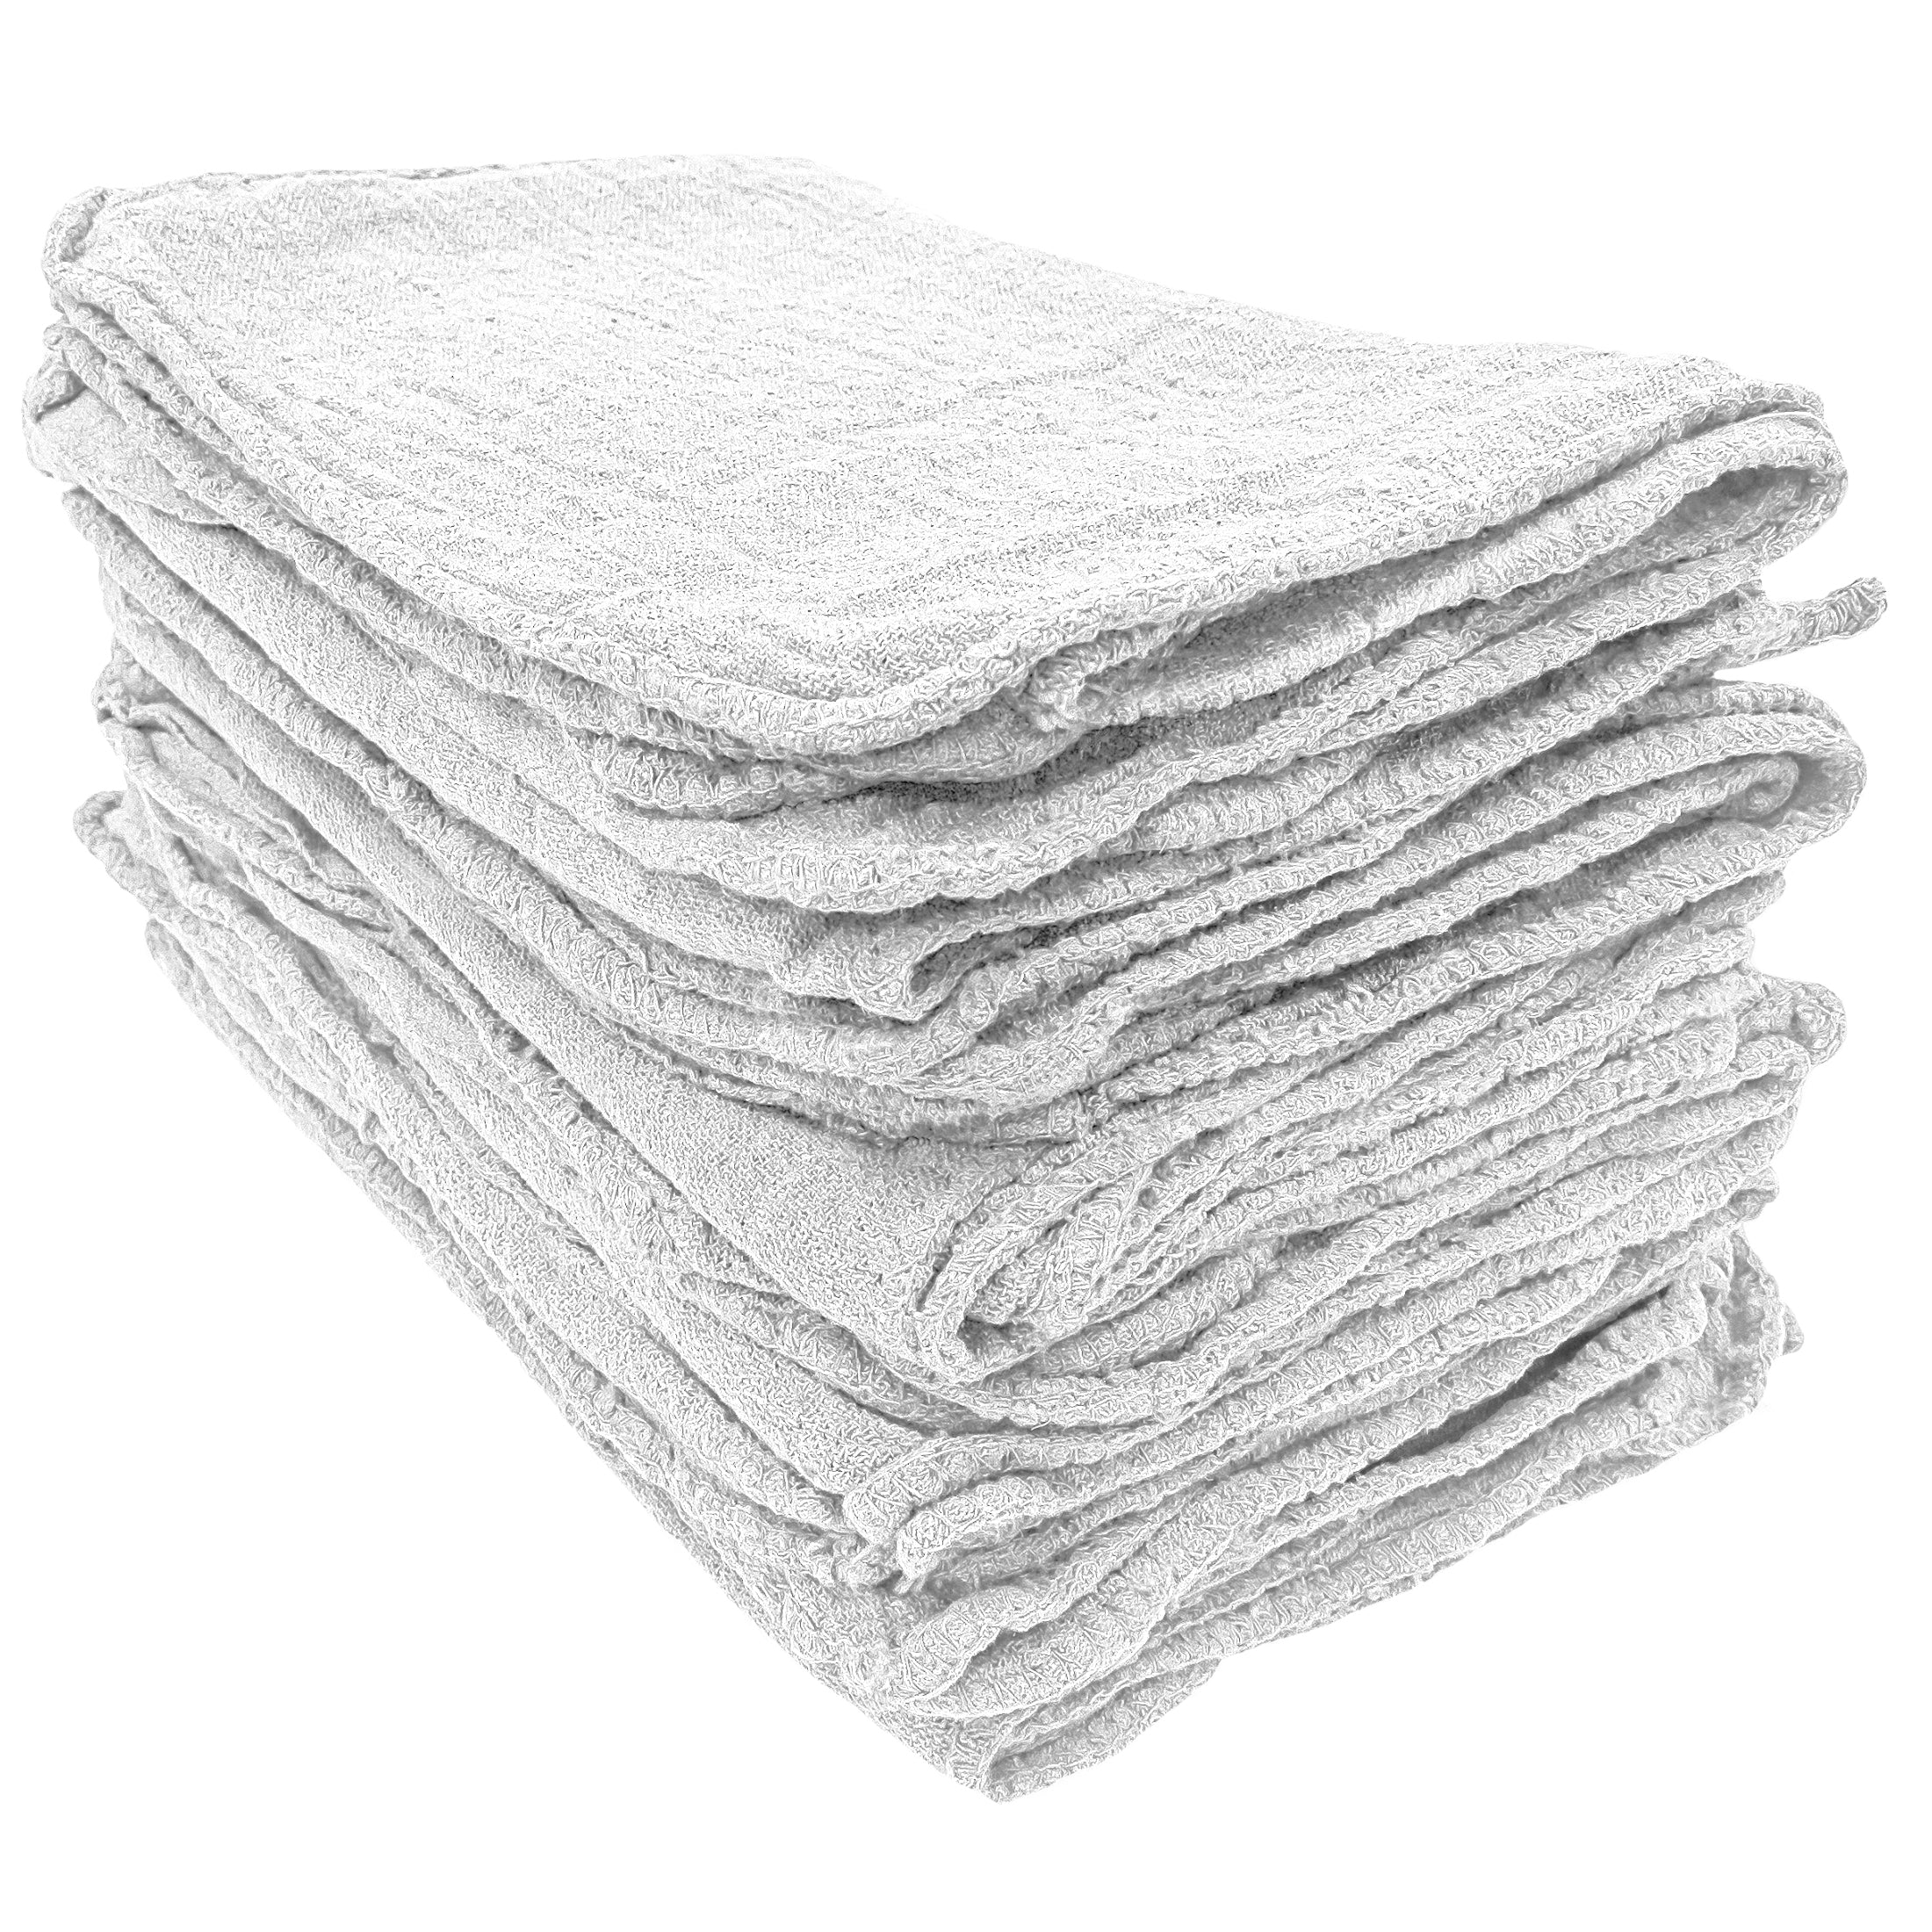 Detailer's Choice 3-685-5 Terry Towel - 12-Pack